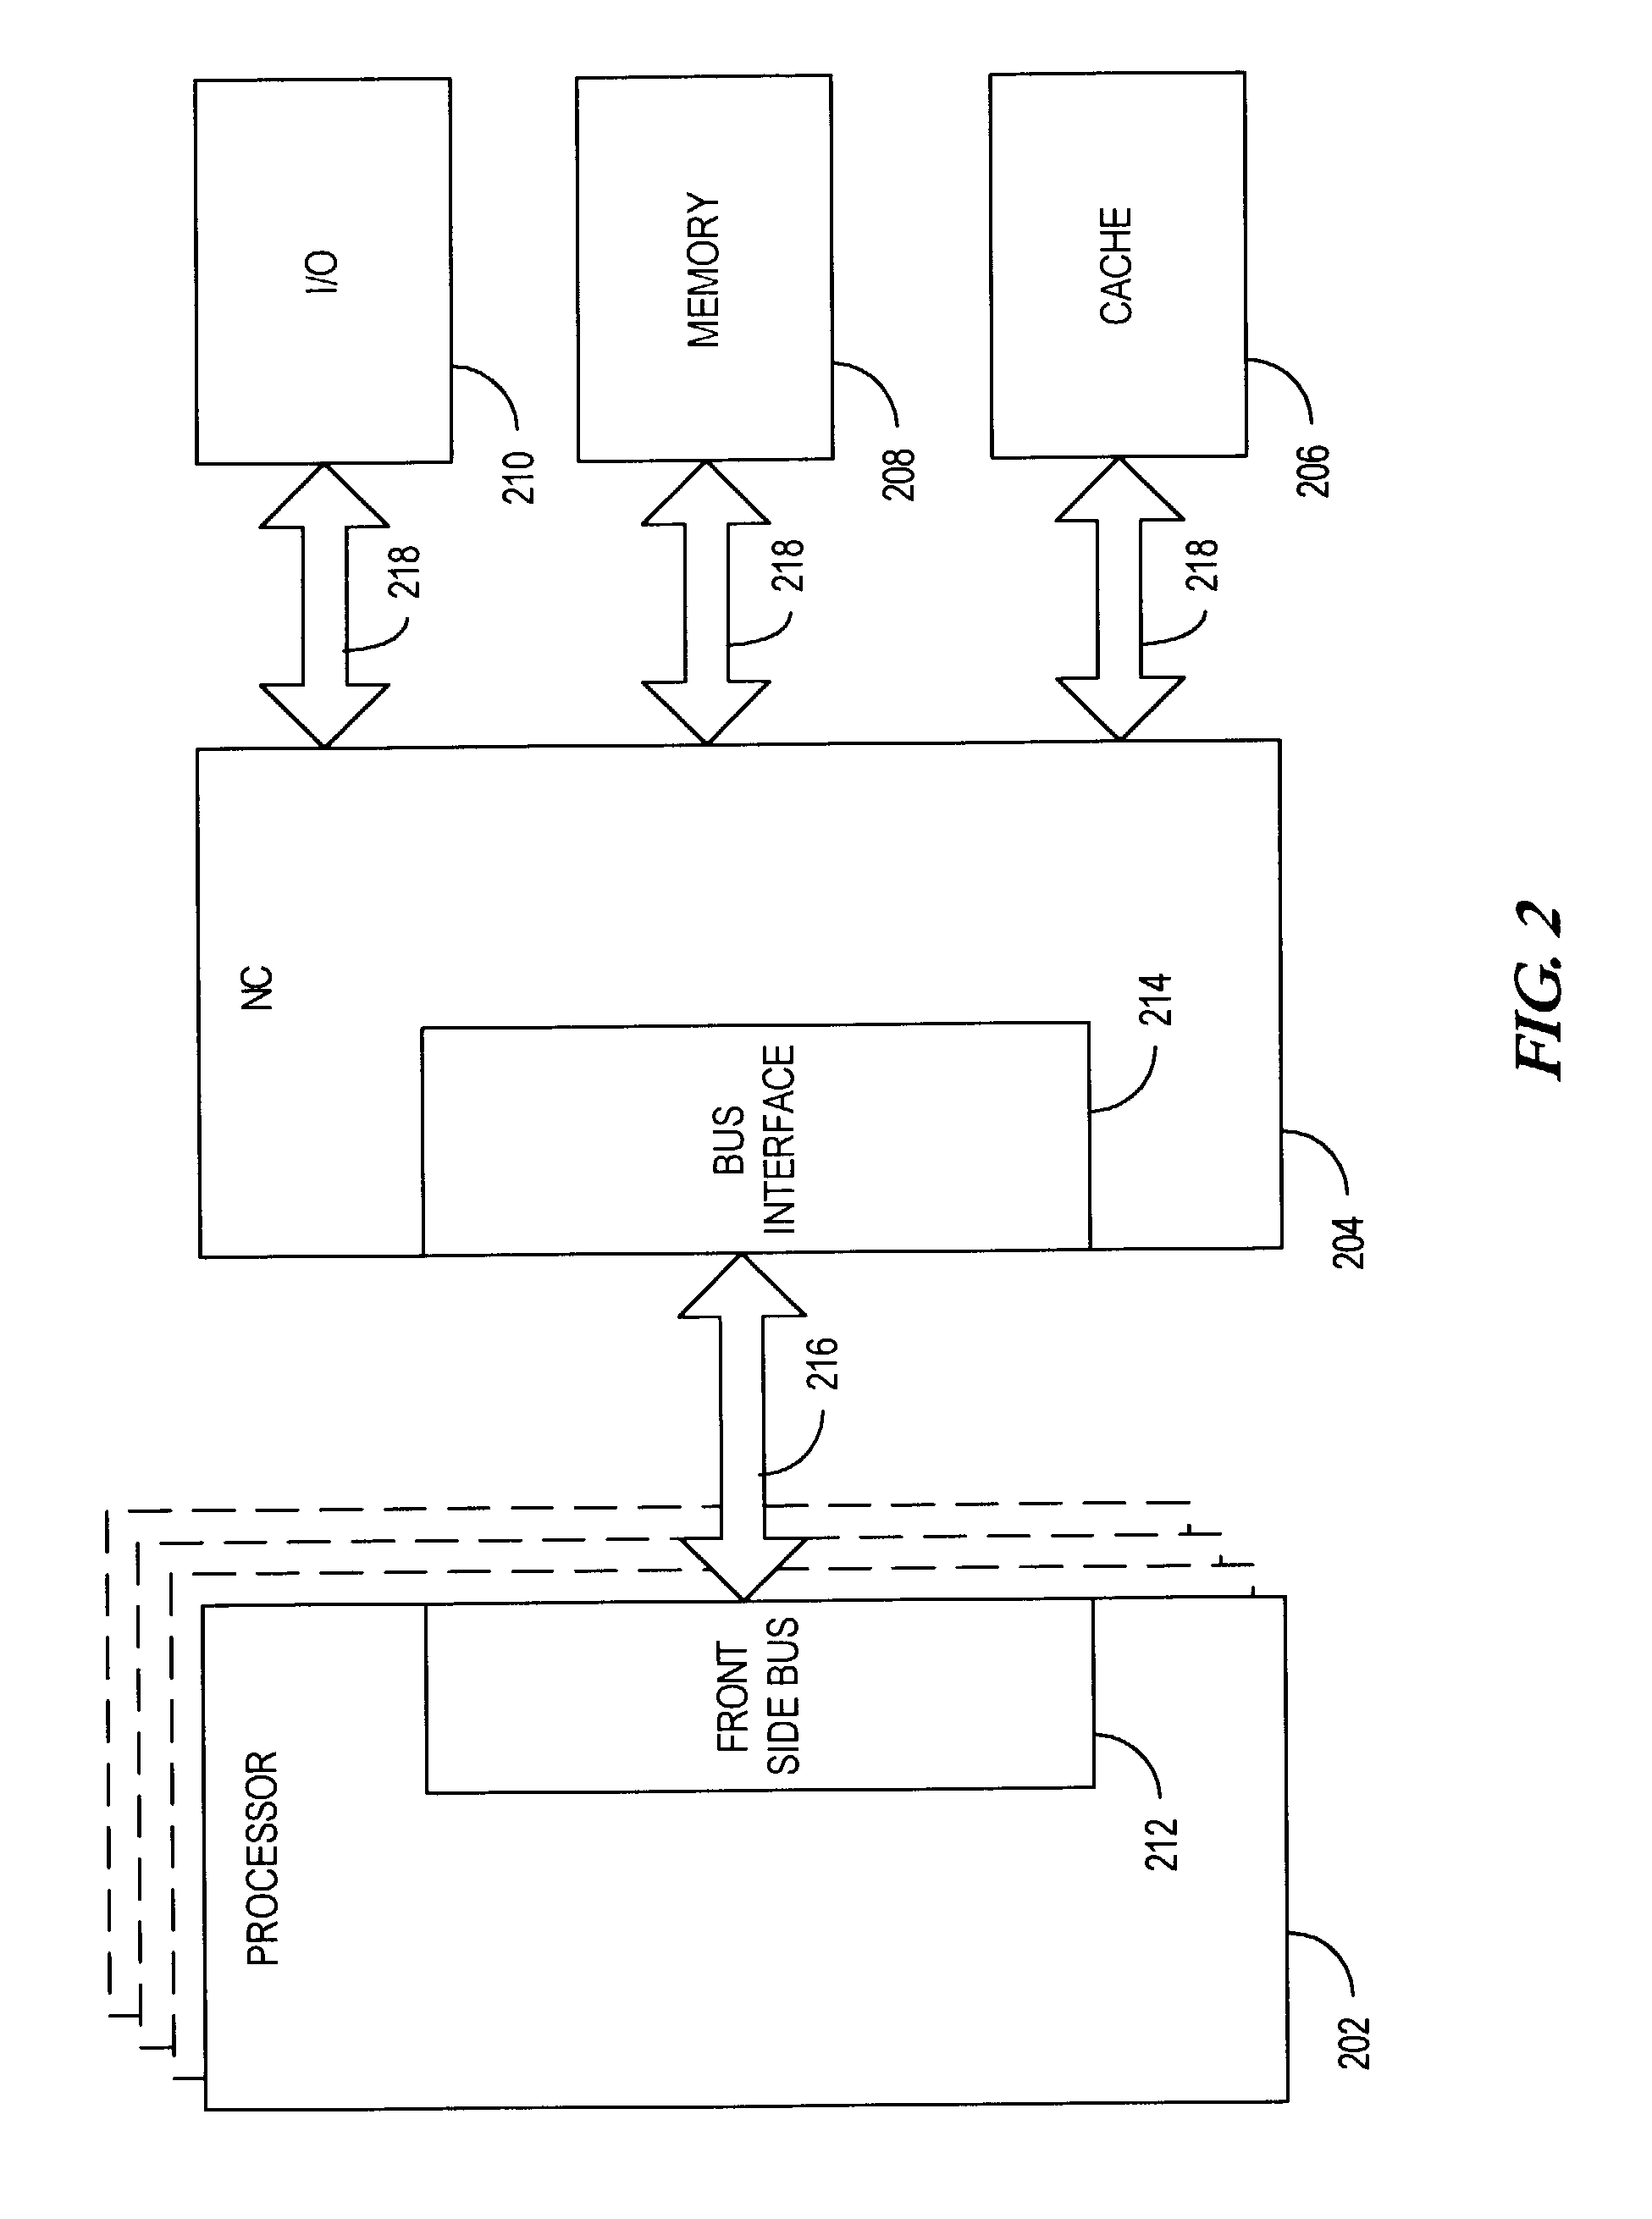 Buffered transfer of data blocks between memory and processors independent of the order of allocation of locations in the buffer